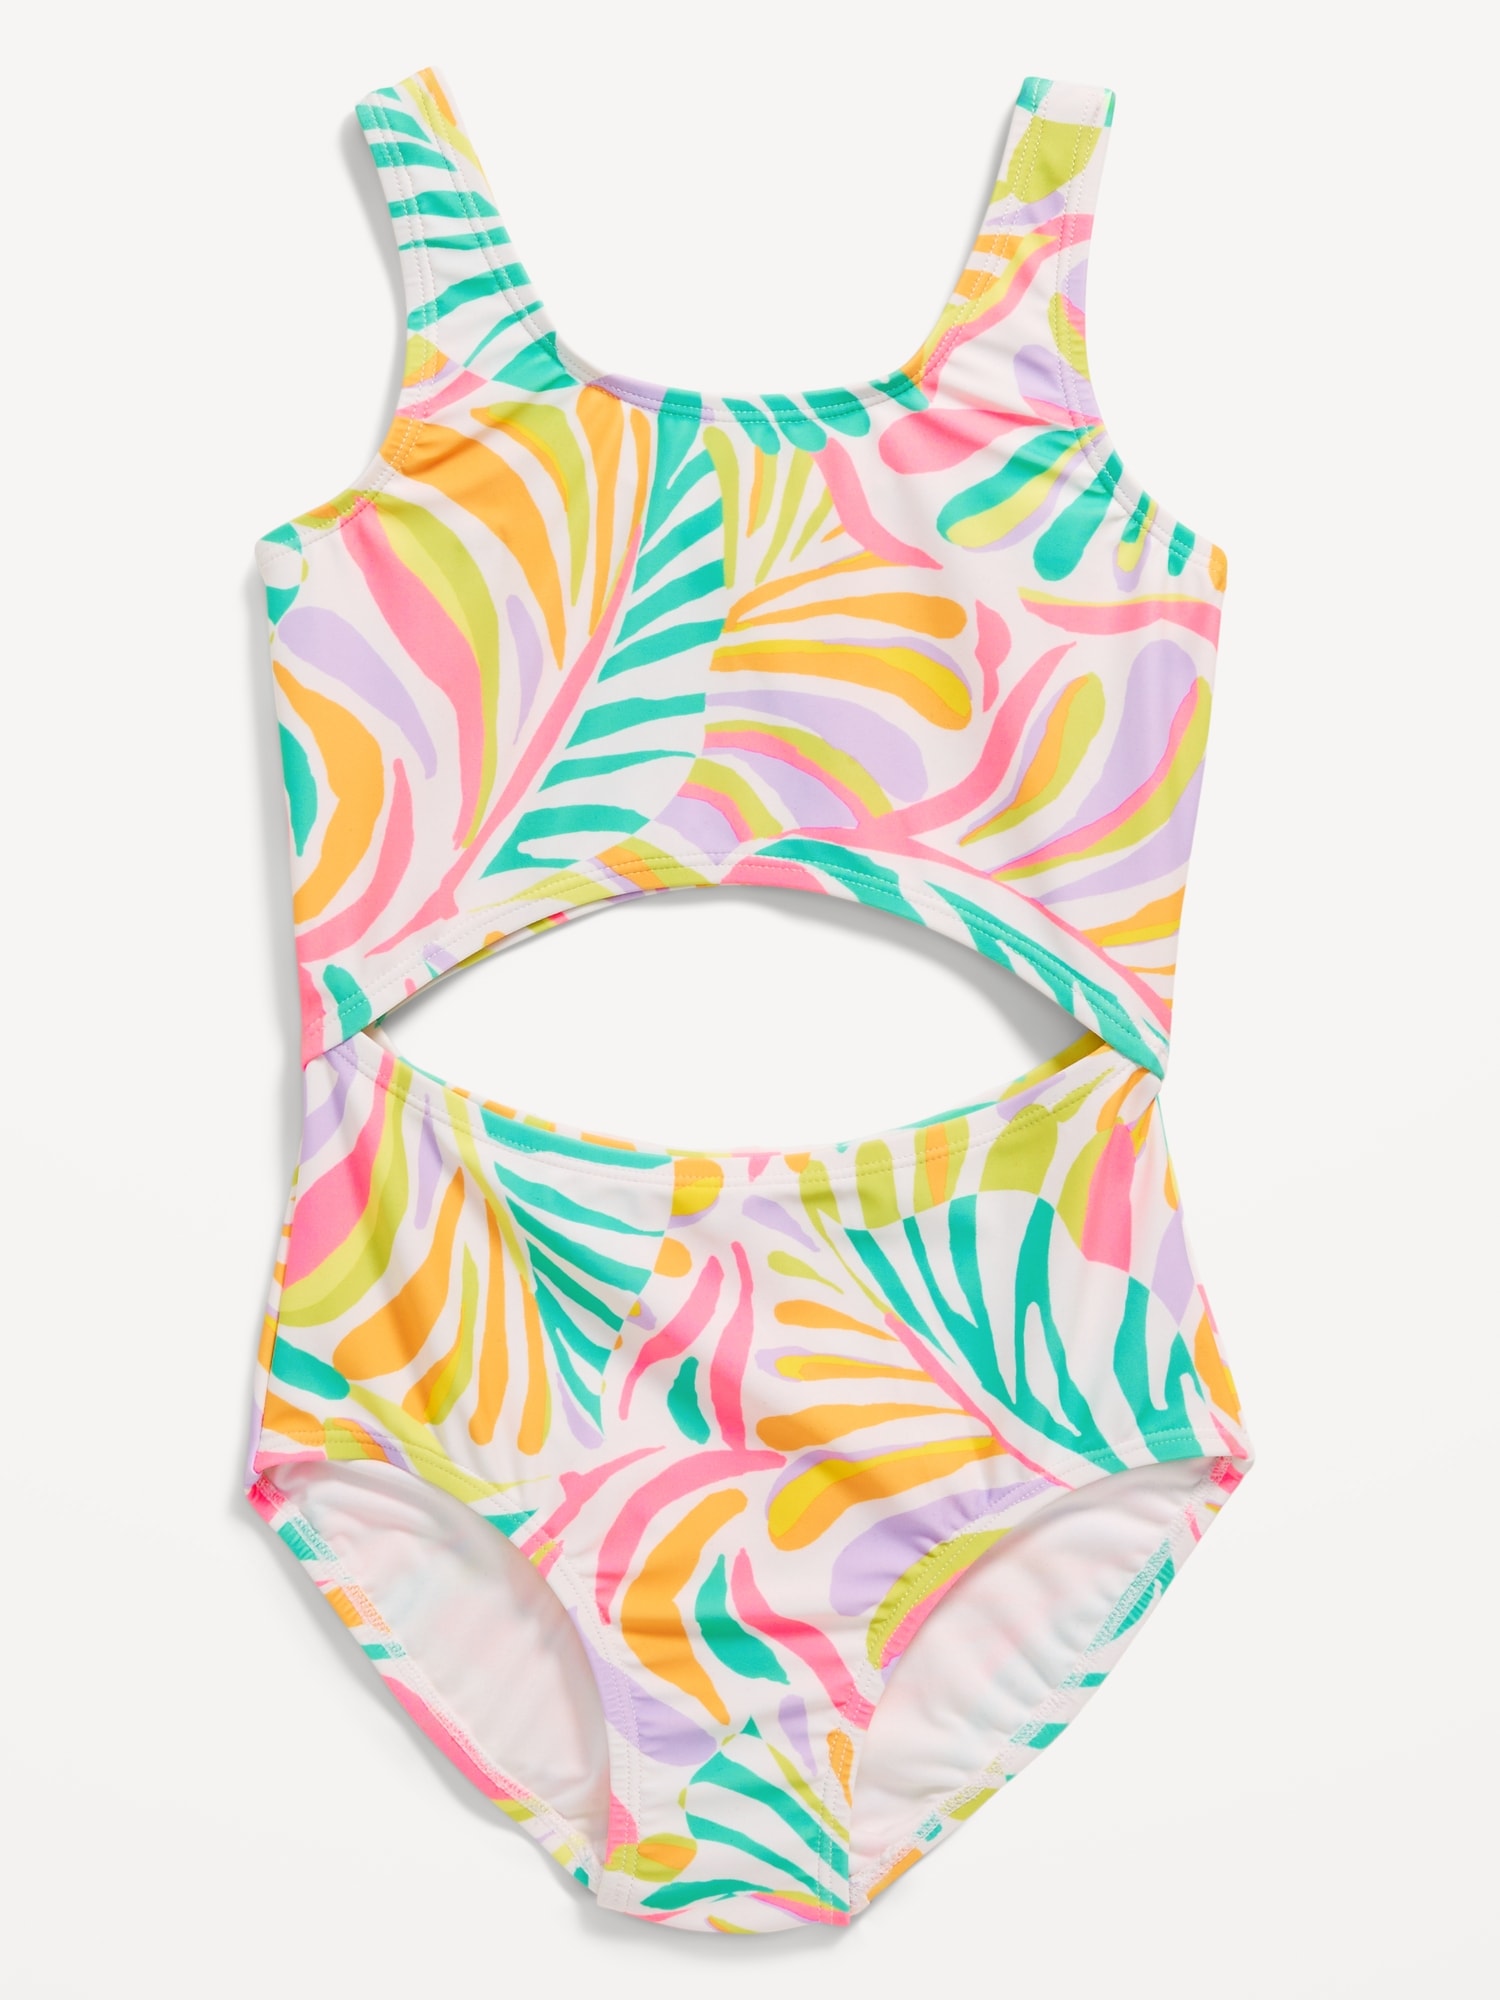 Printed Cutout One-Piece Swimsuit for Girls